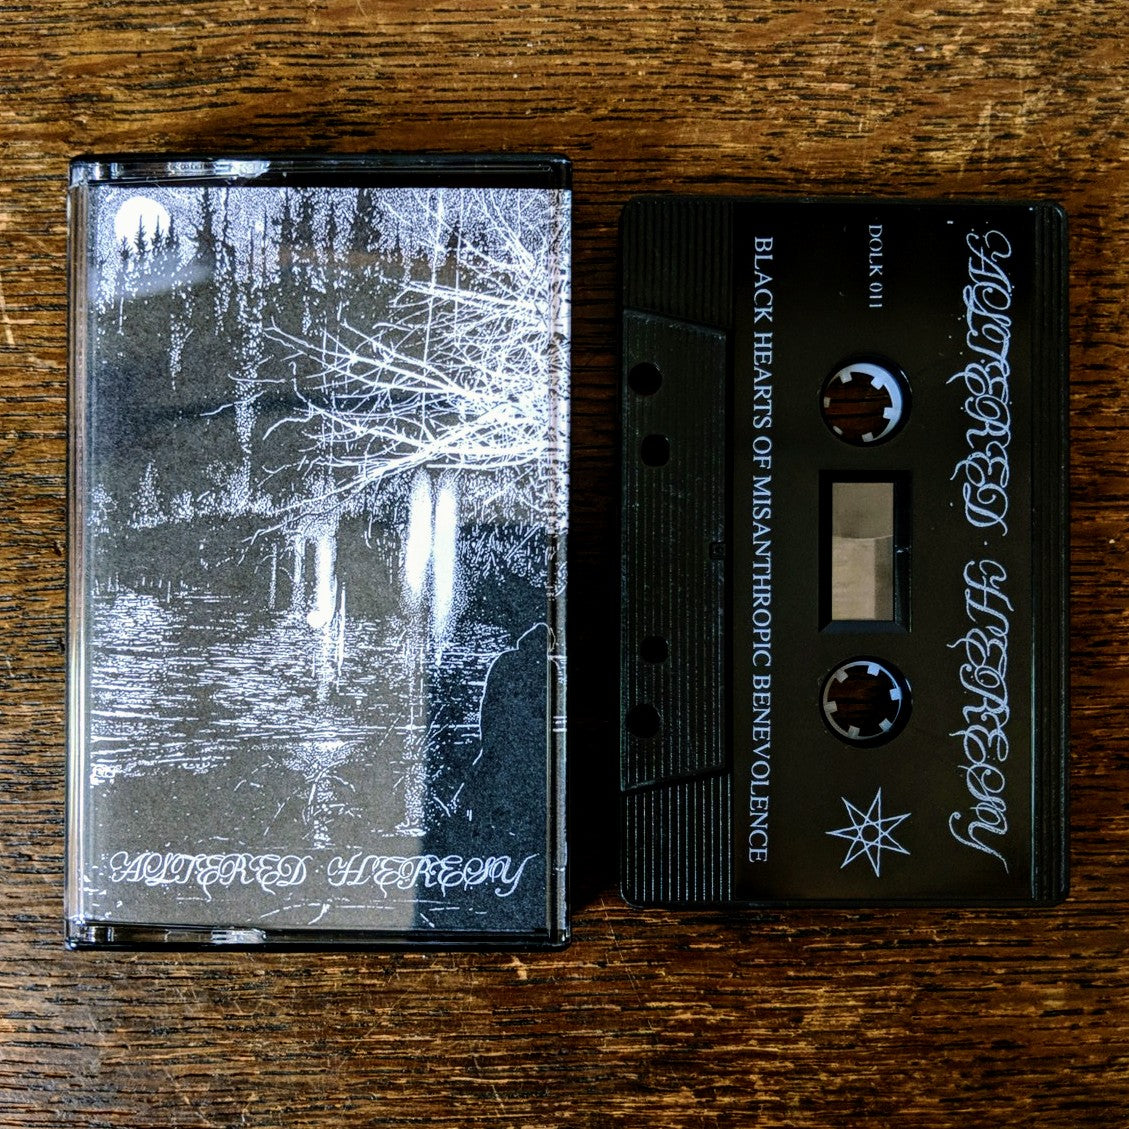 [SOLD OUT] ALTERED HERESY "Black Hearts Of Misanthropic Benevolence"  Cassette Tape